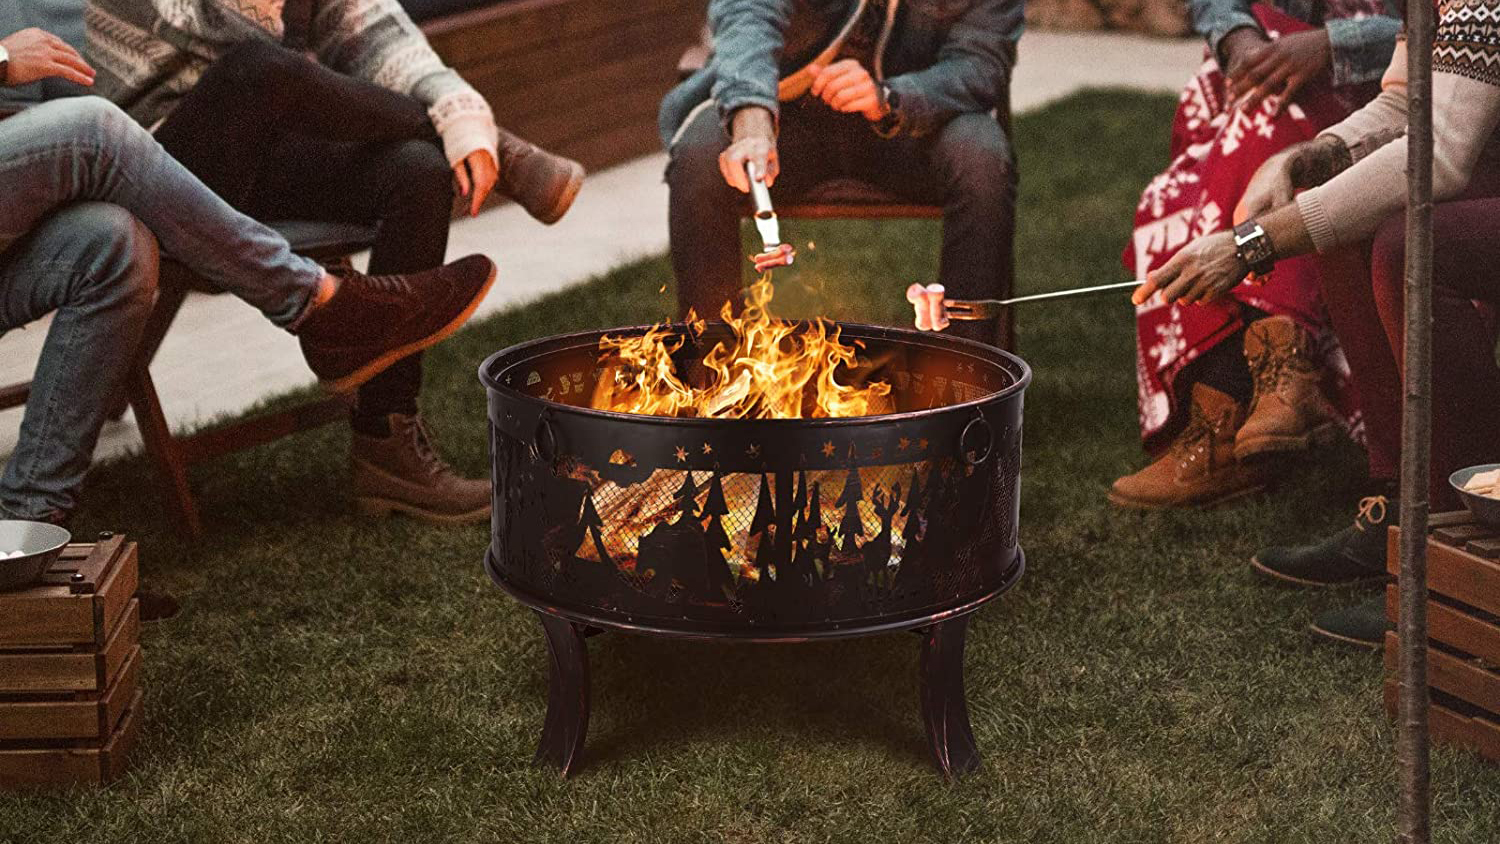 Best Fire Pit 2021 Keep Warm Outdoors T3, Long Lasting Fire Pit